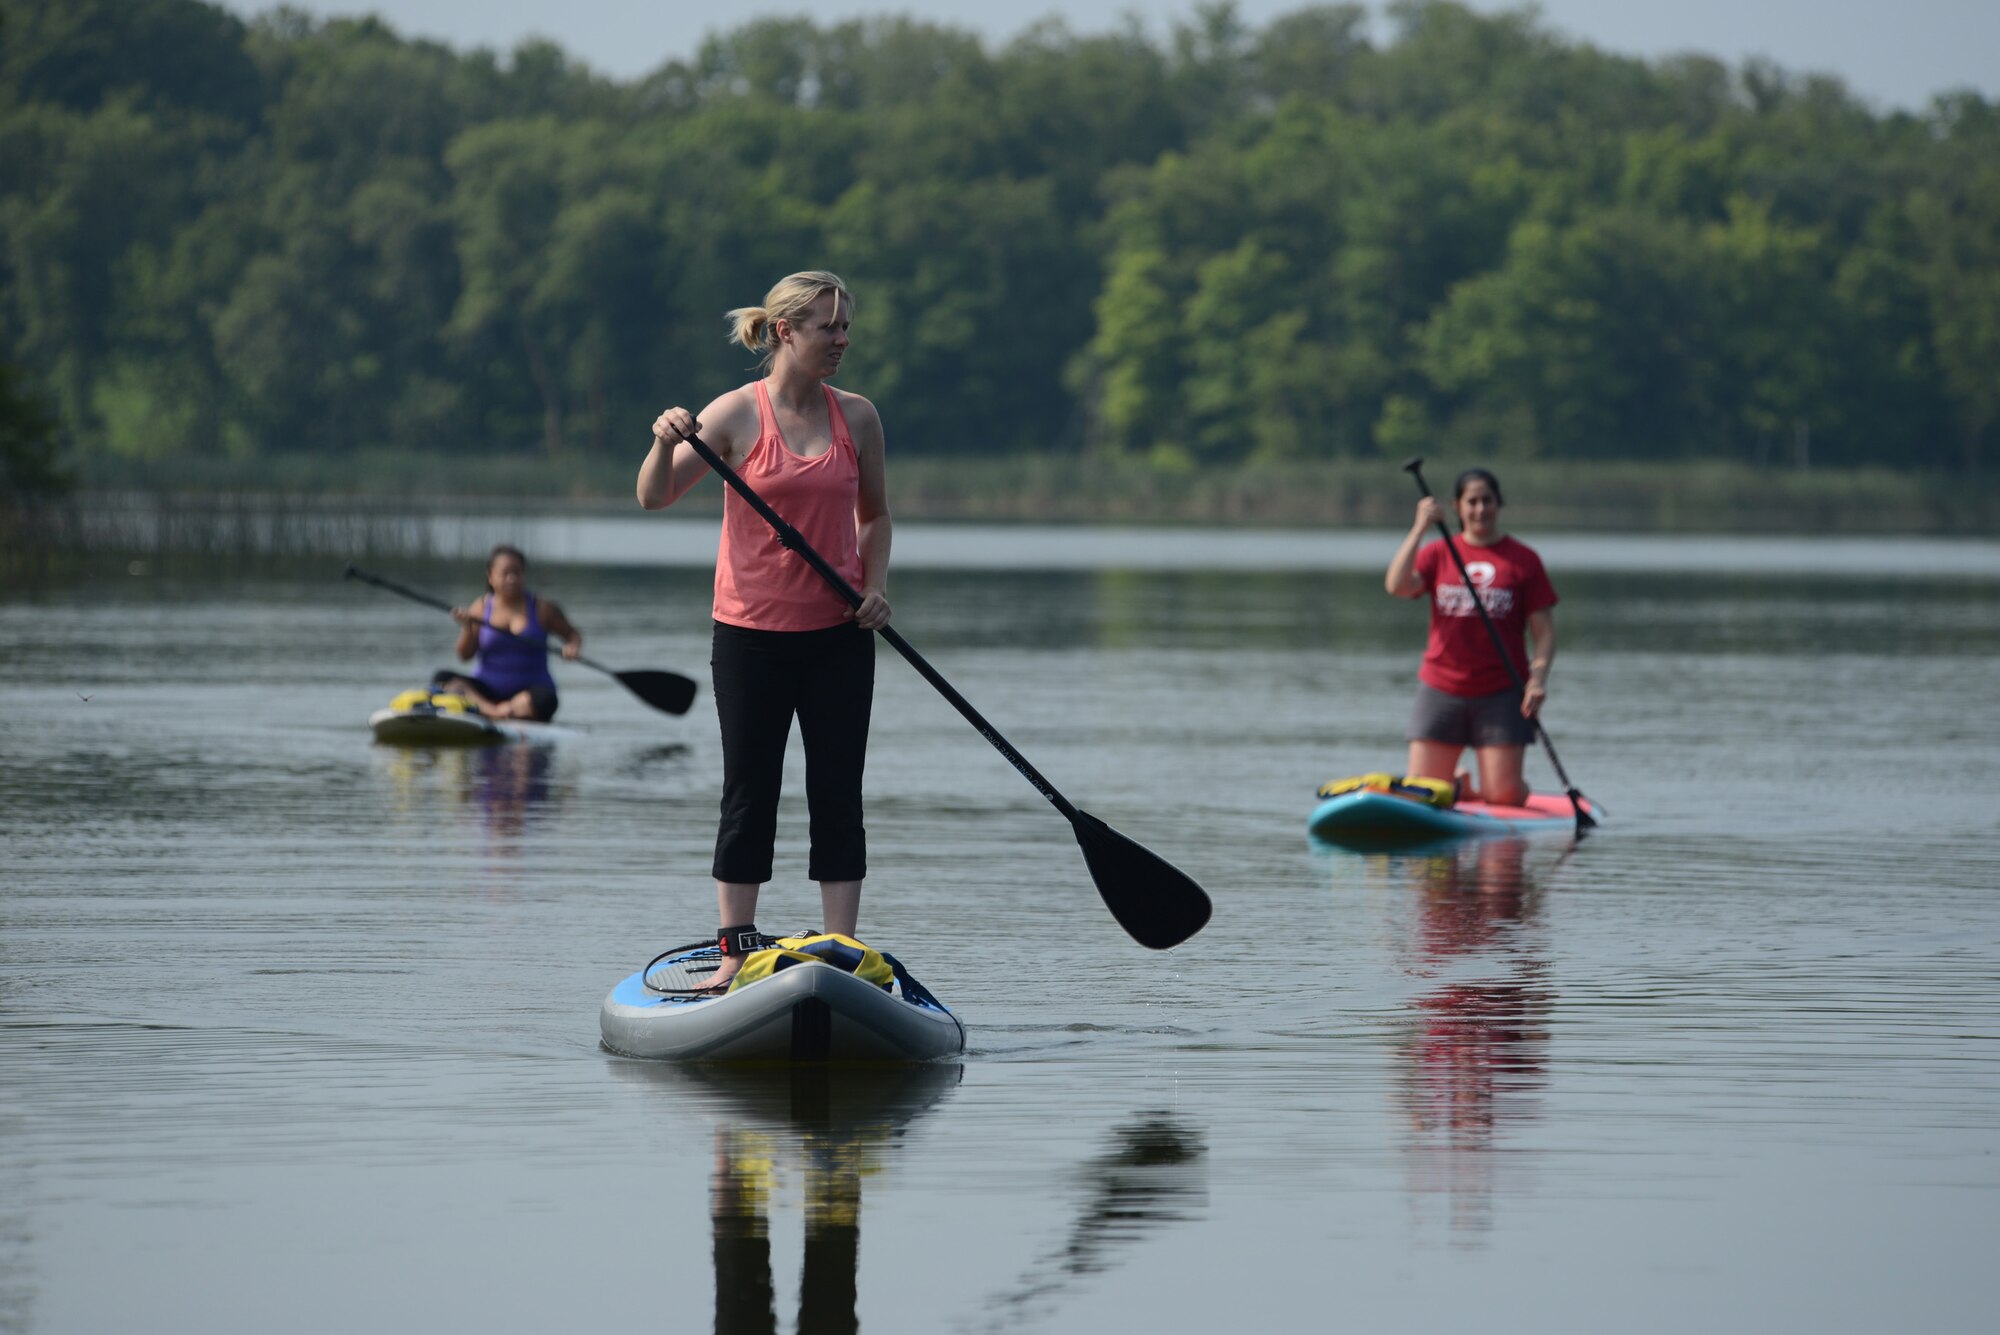 (From left to right) Sonia Cazarez, Tami Imlay and Leigh Giglio practice maneuvering paddleboards on the calm water of Holbrook Lake, Minn., Aug. 1, 2014, during a retreat for widows of U.S. military members who lost their lives while serving their country. The Holbrook Farms Retreat is hosted by husband and wife Lt. Col. Matthew Brancato and Lt. Col. Micaela Brancato, both in the 119th Wing. (U.S. Air Force photo/Senior Master Sgt. David H. Lipp)